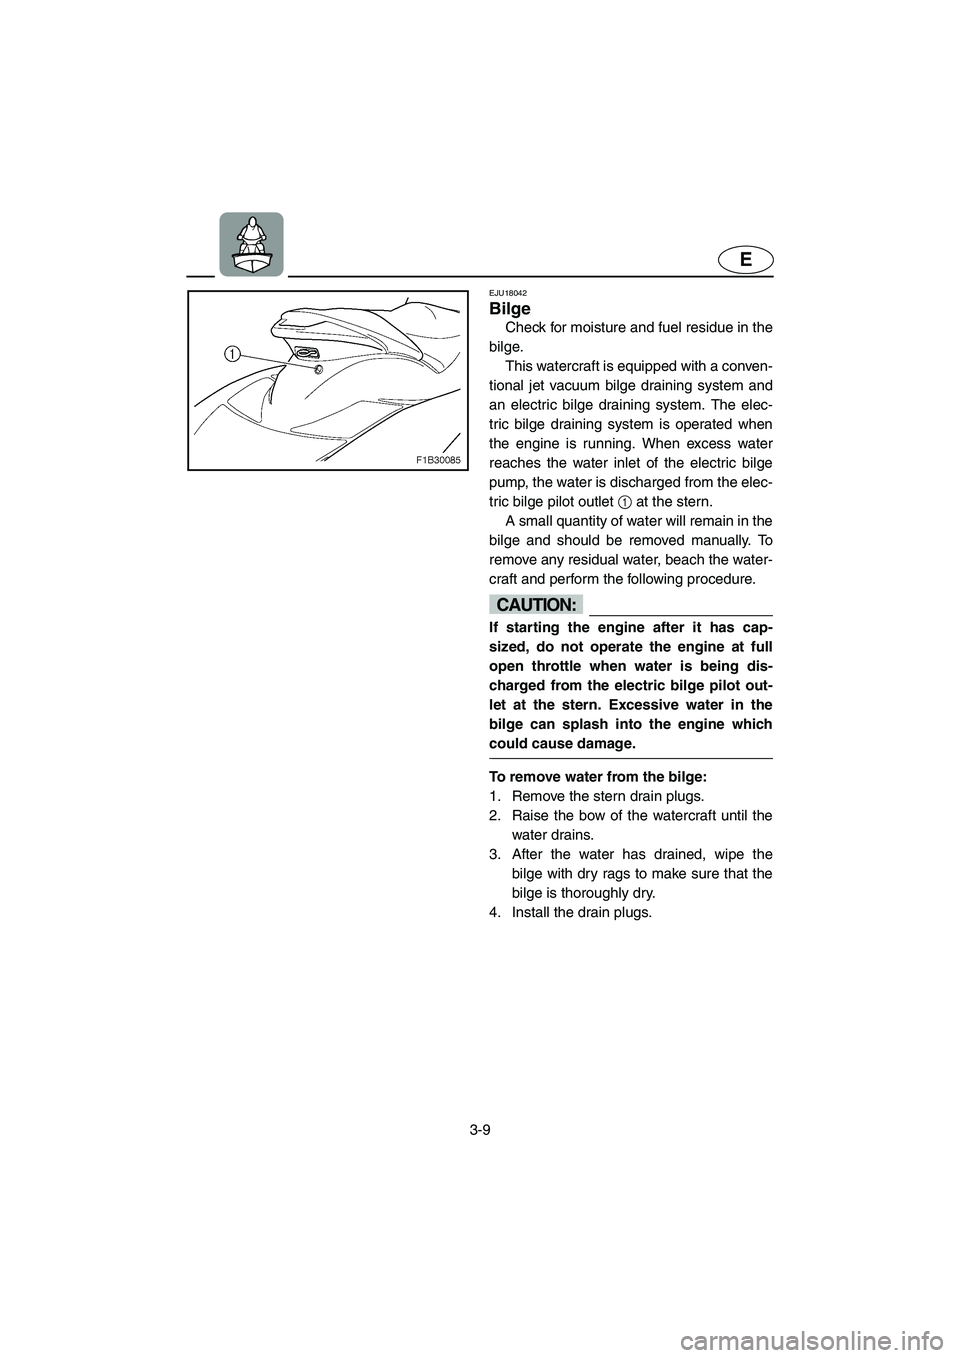 YAMAHA FX HO 2006 Manual PDF 3-9
E
EJU18042 
Bilge 
Check for moisture and fuel residue in the
bilge.
This watercraft is equipped with a conven-
tional jet vacuum bilge draining system and
an electric bilge draining system. The e